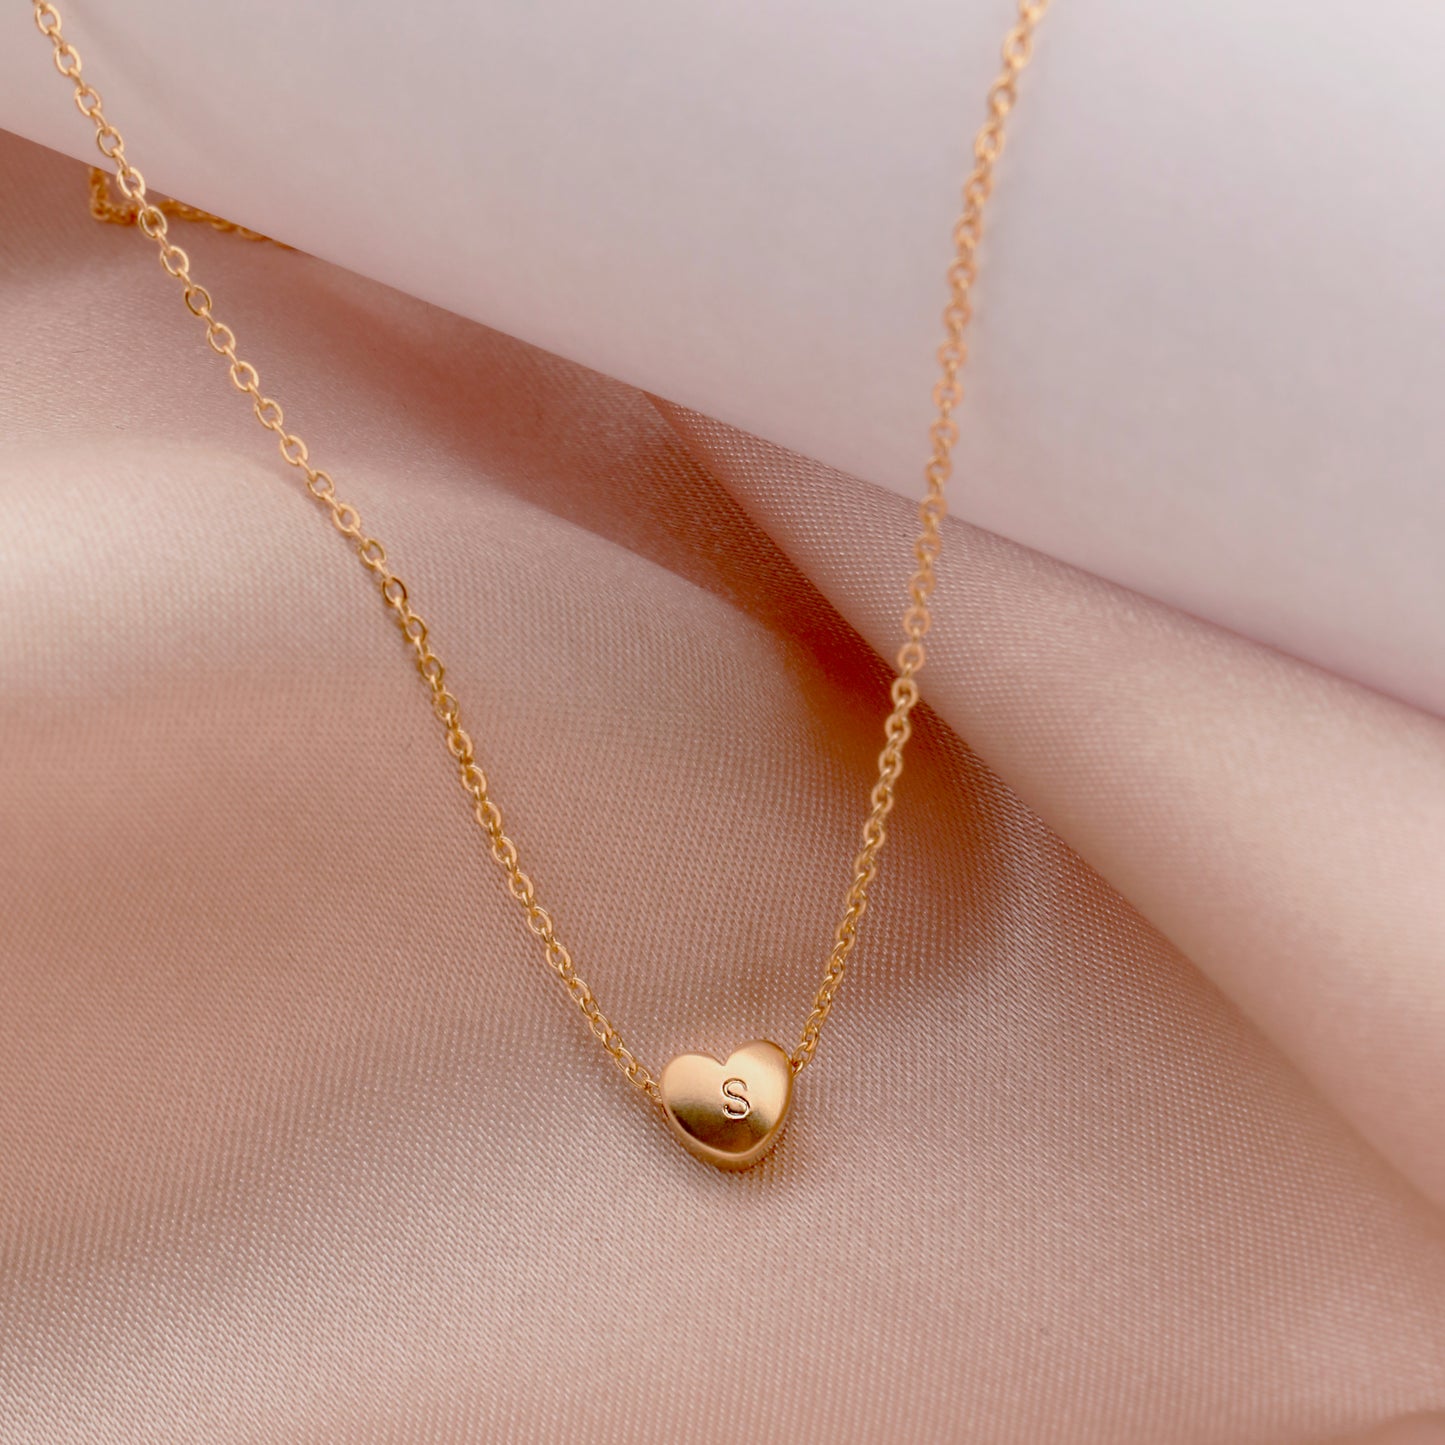 TT initial heart Necklace with Hand stamped - 16k Gold Plated